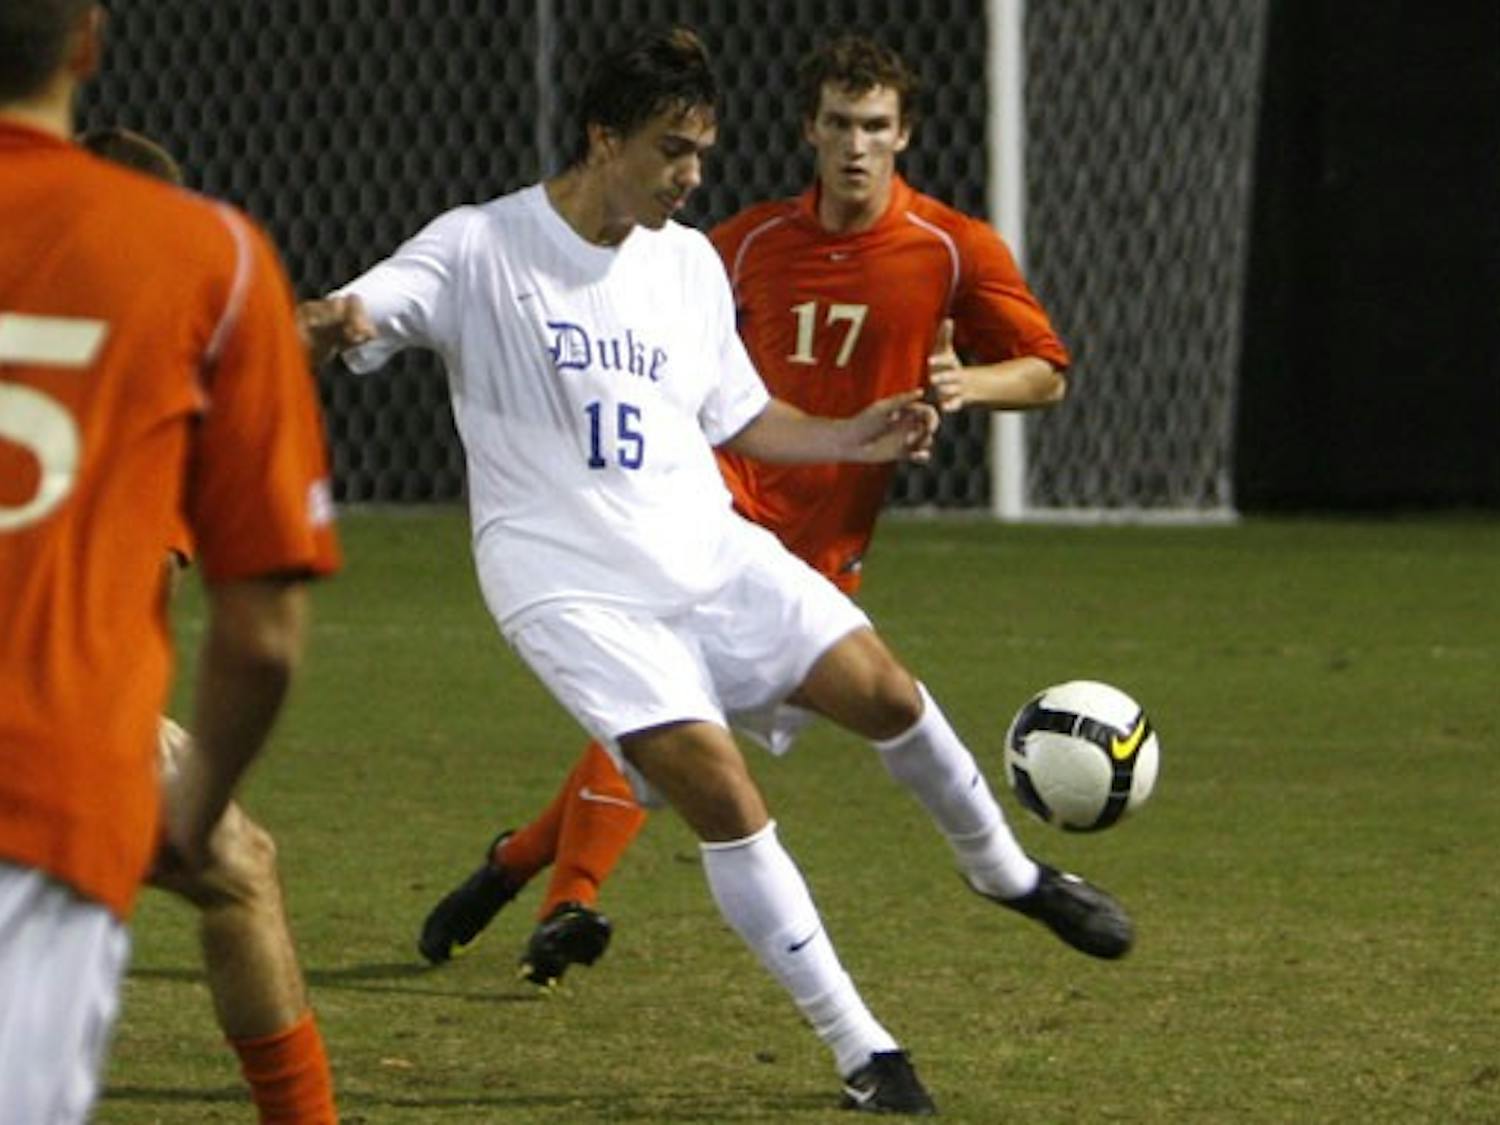 Junior Cole Grossman and Duke lost 2-0 to Boston College earlier this season in Chestnut Hill, Mass.